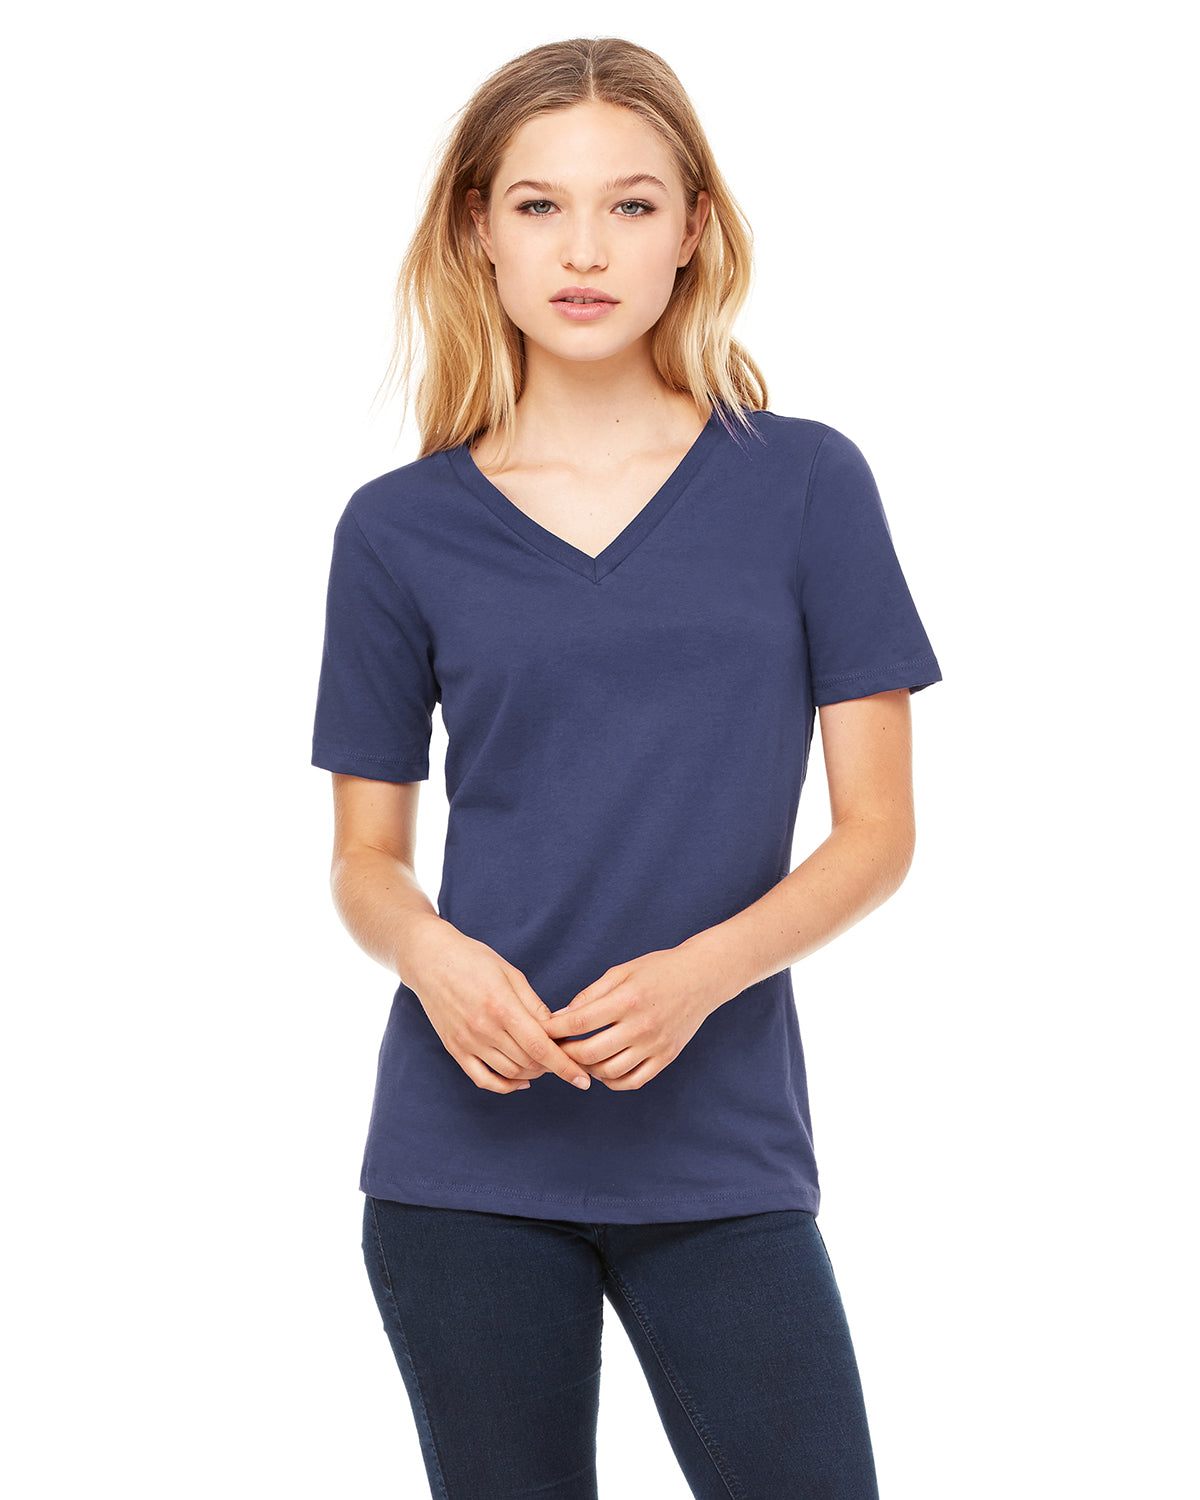 6405 – Bella + Canvas Ladies’ Relaxed Jersey Short-Sleeve V-Neck T-Shirt